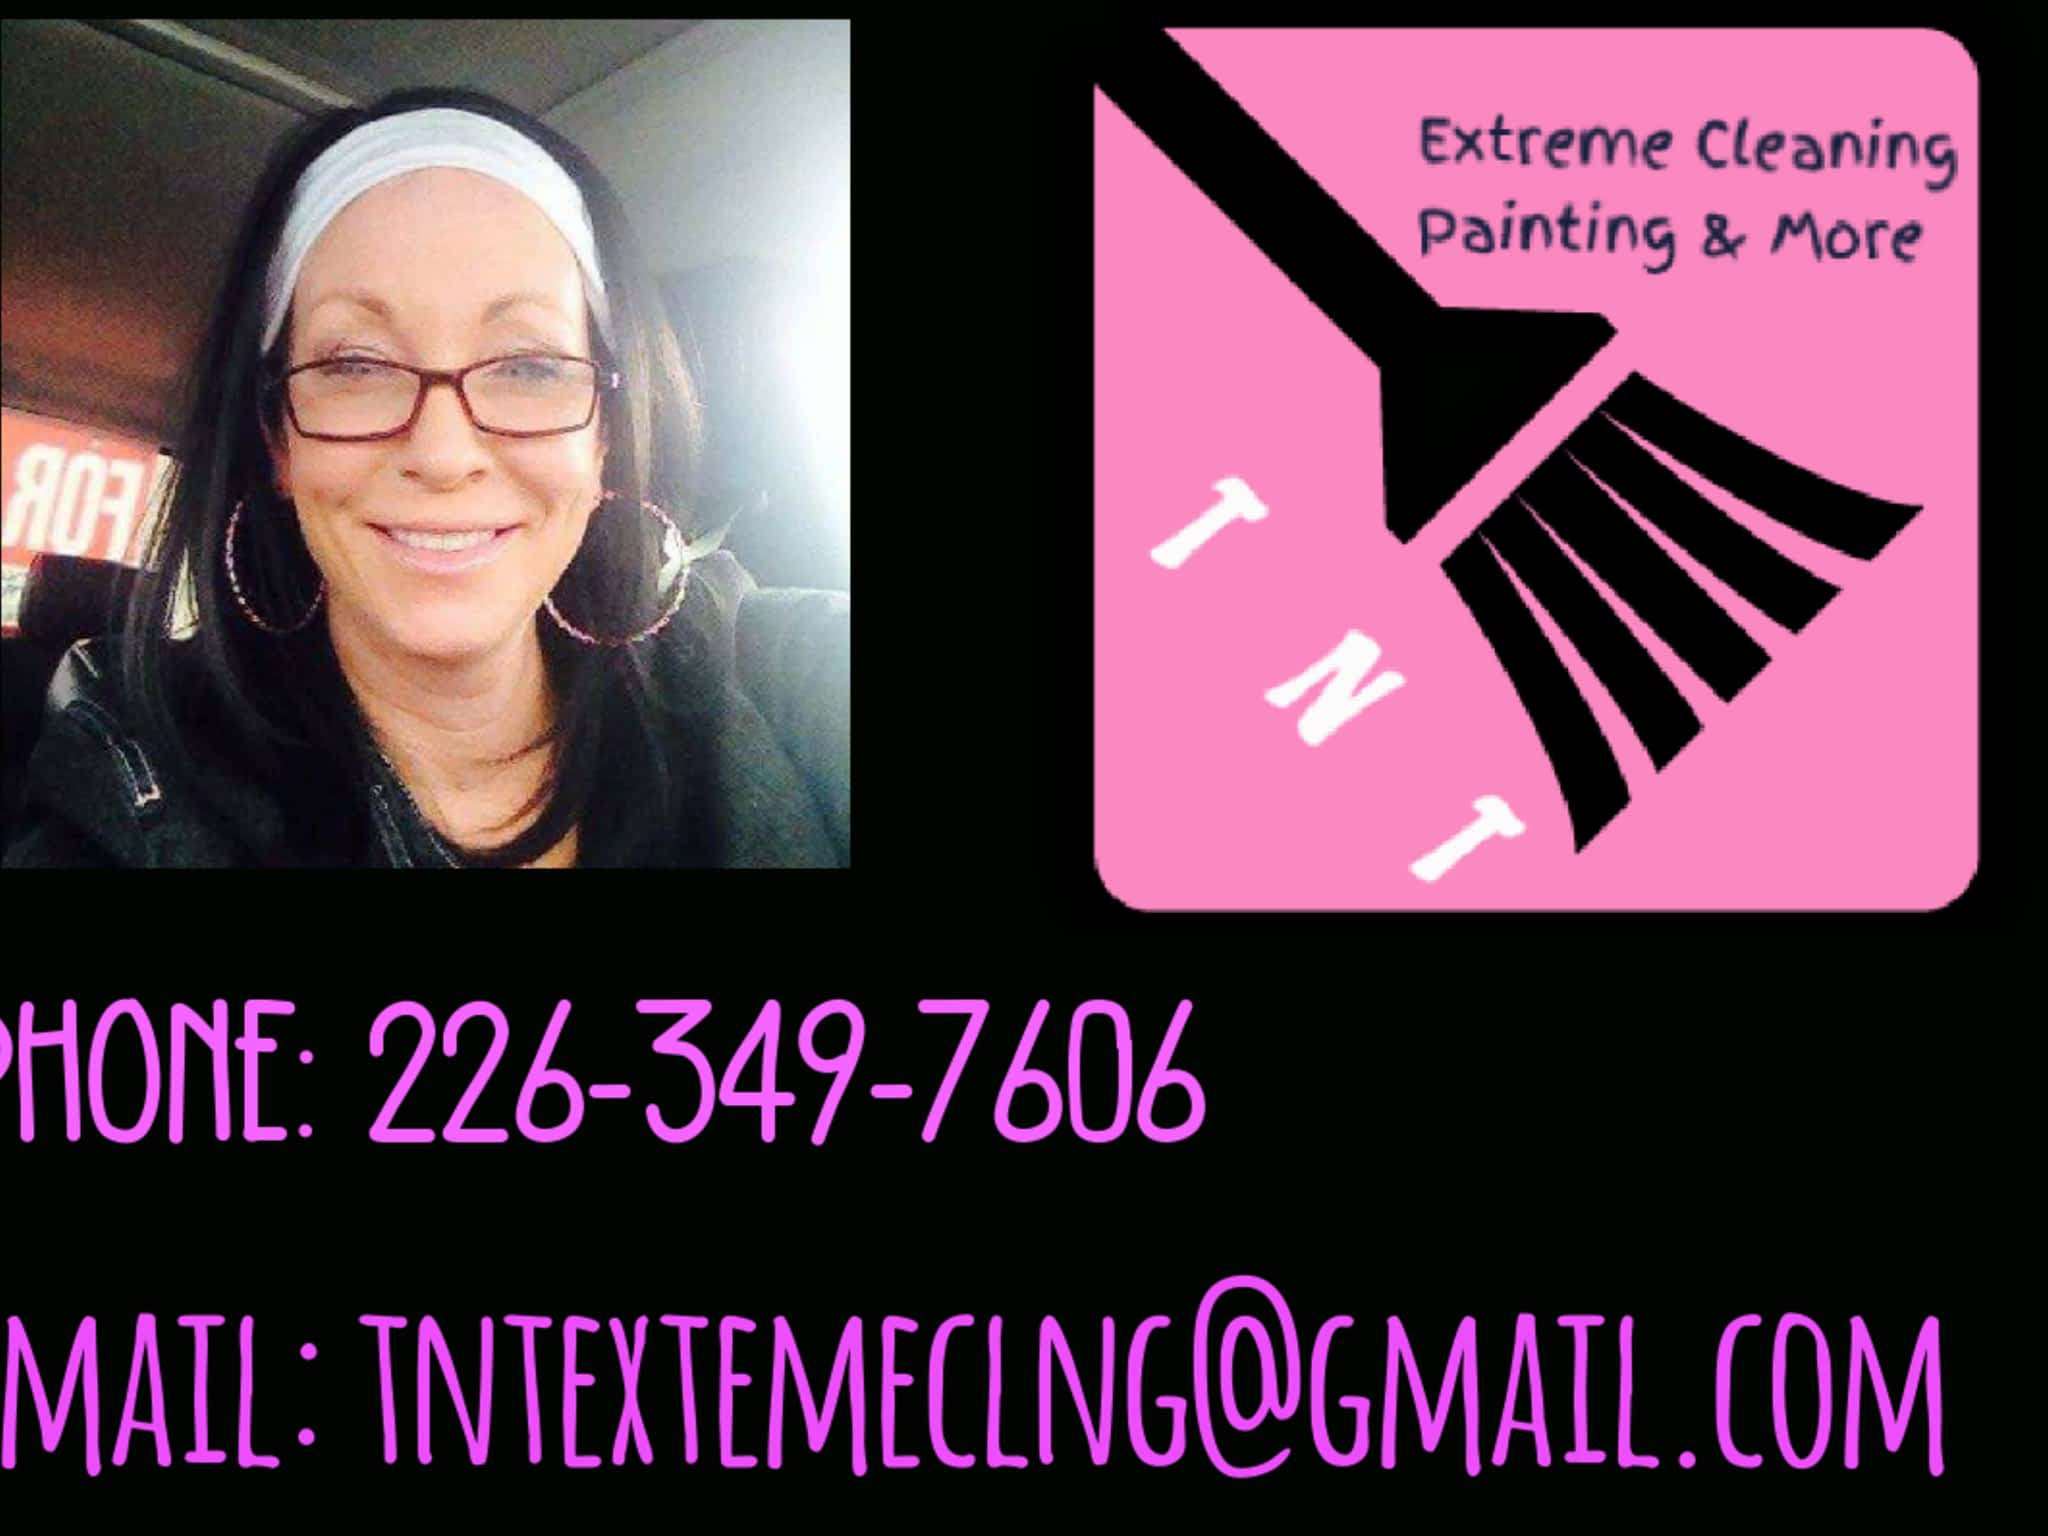 photo TNT Extreme Cleaning Painting Furniture & More